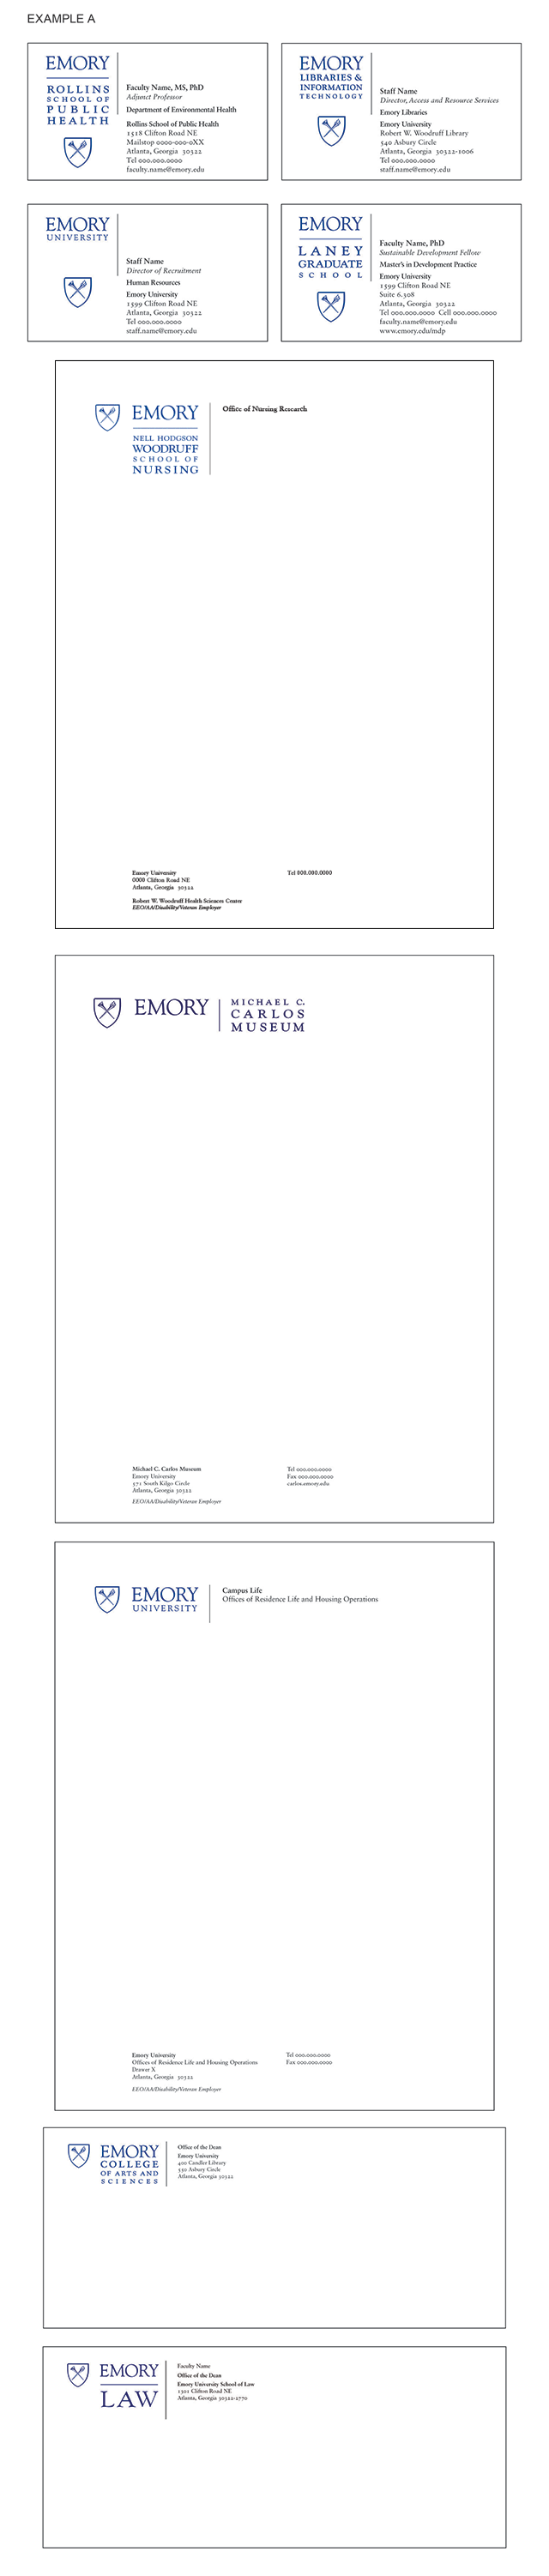 Image examples of stationary for faculty and staff with the Emory University logo 